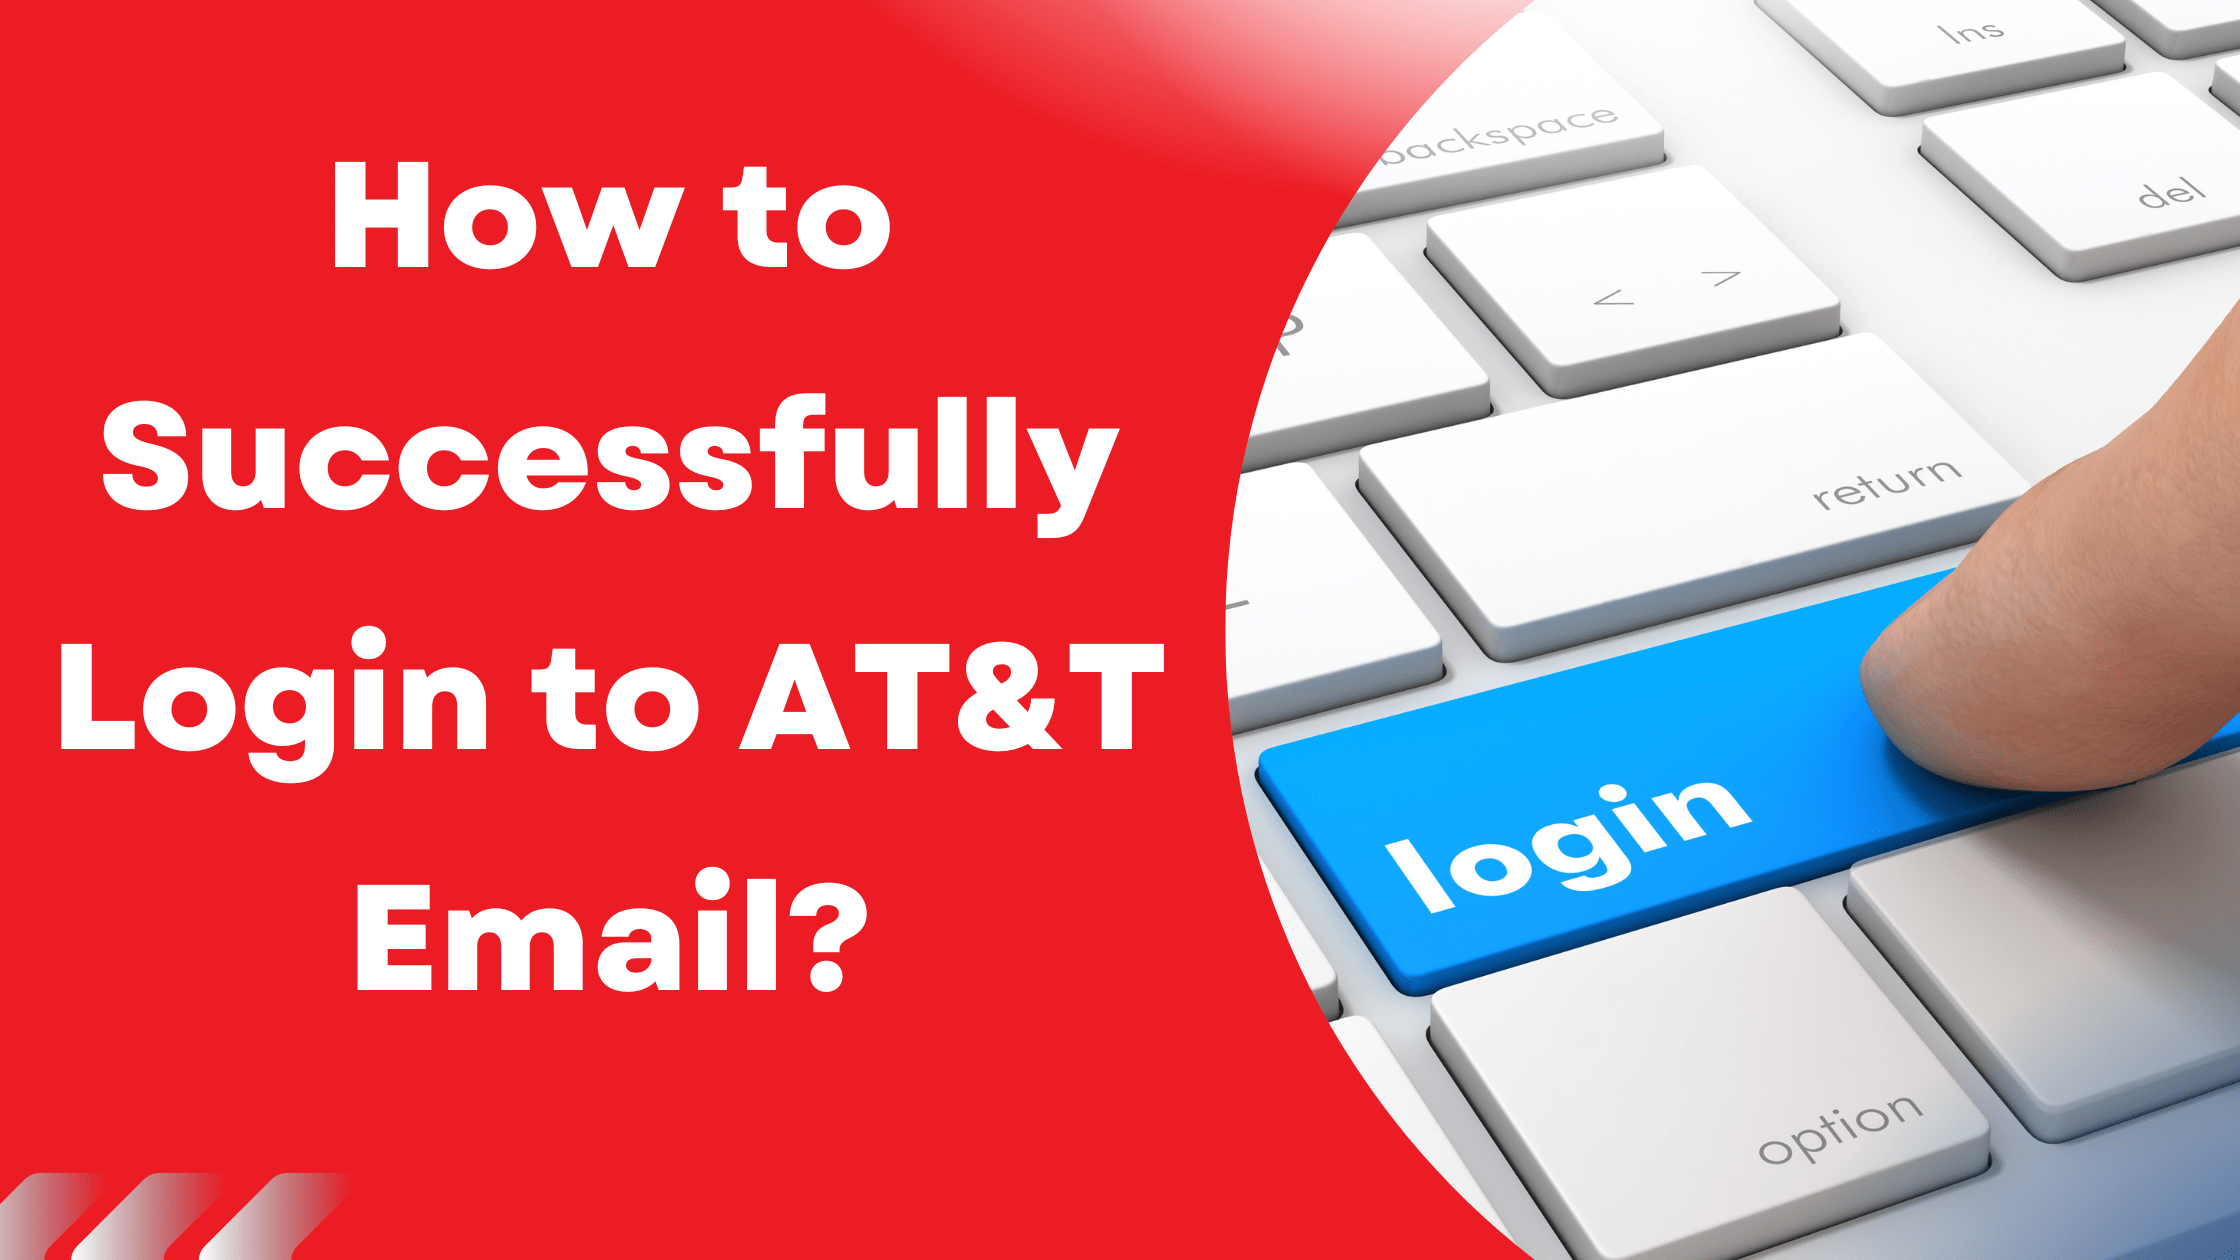 login AT&T email